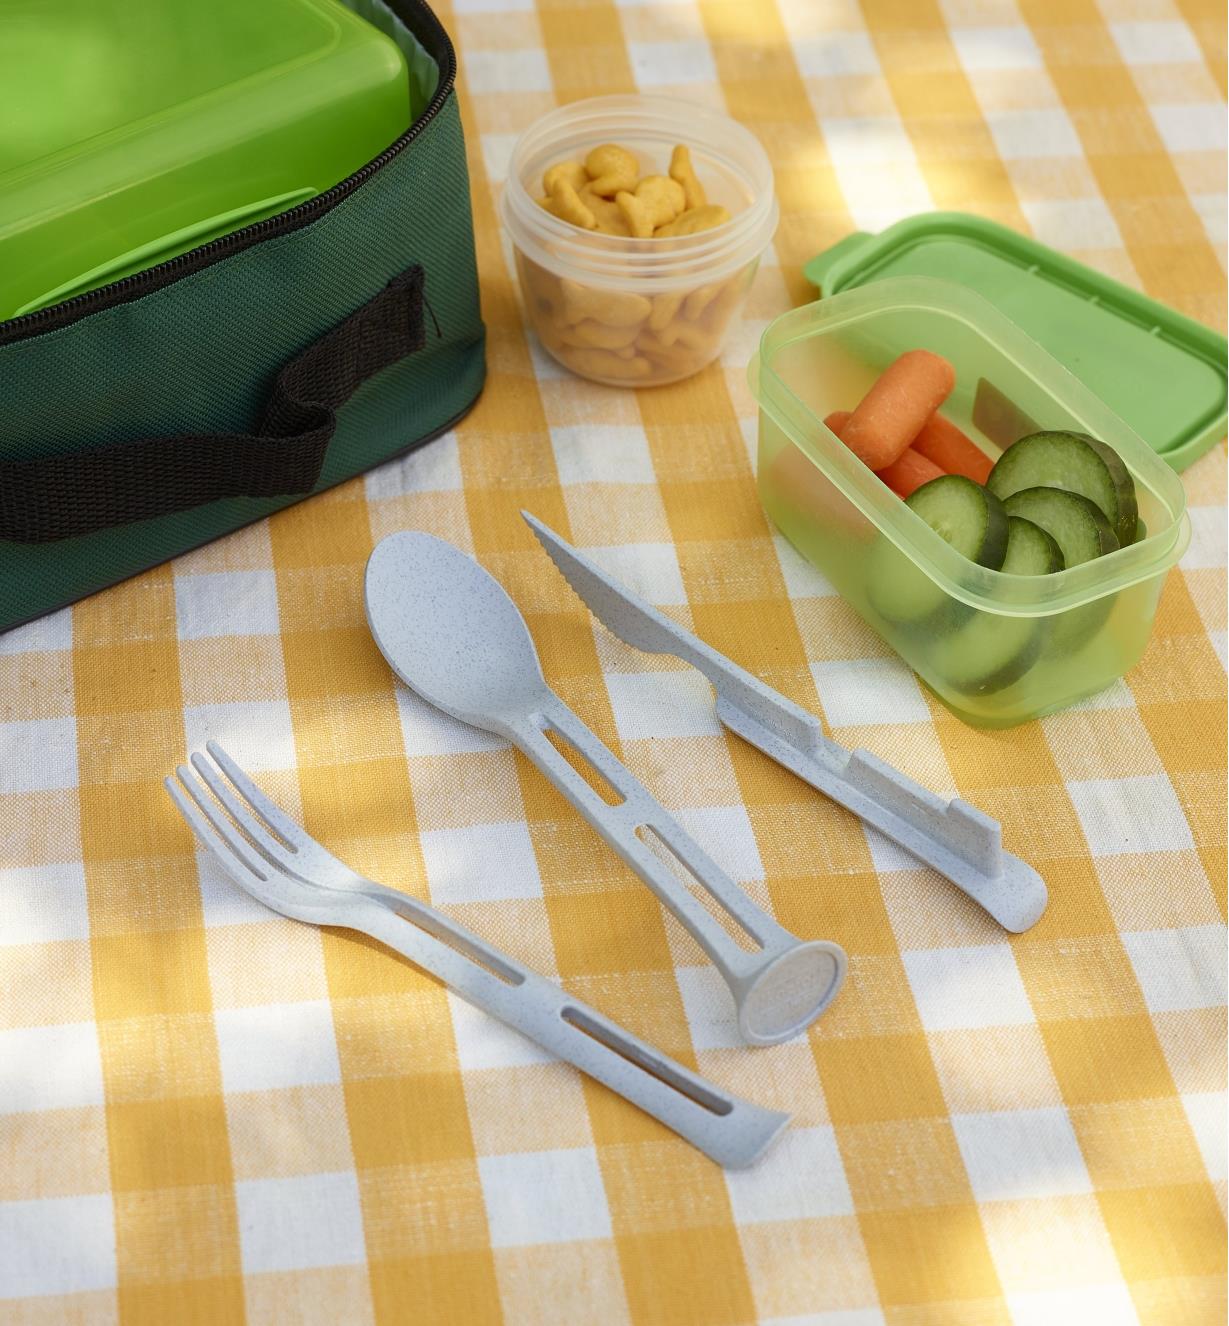 Gray Klikk small cutlery set taken apart to show the knife, fork and spoon next to containers of food